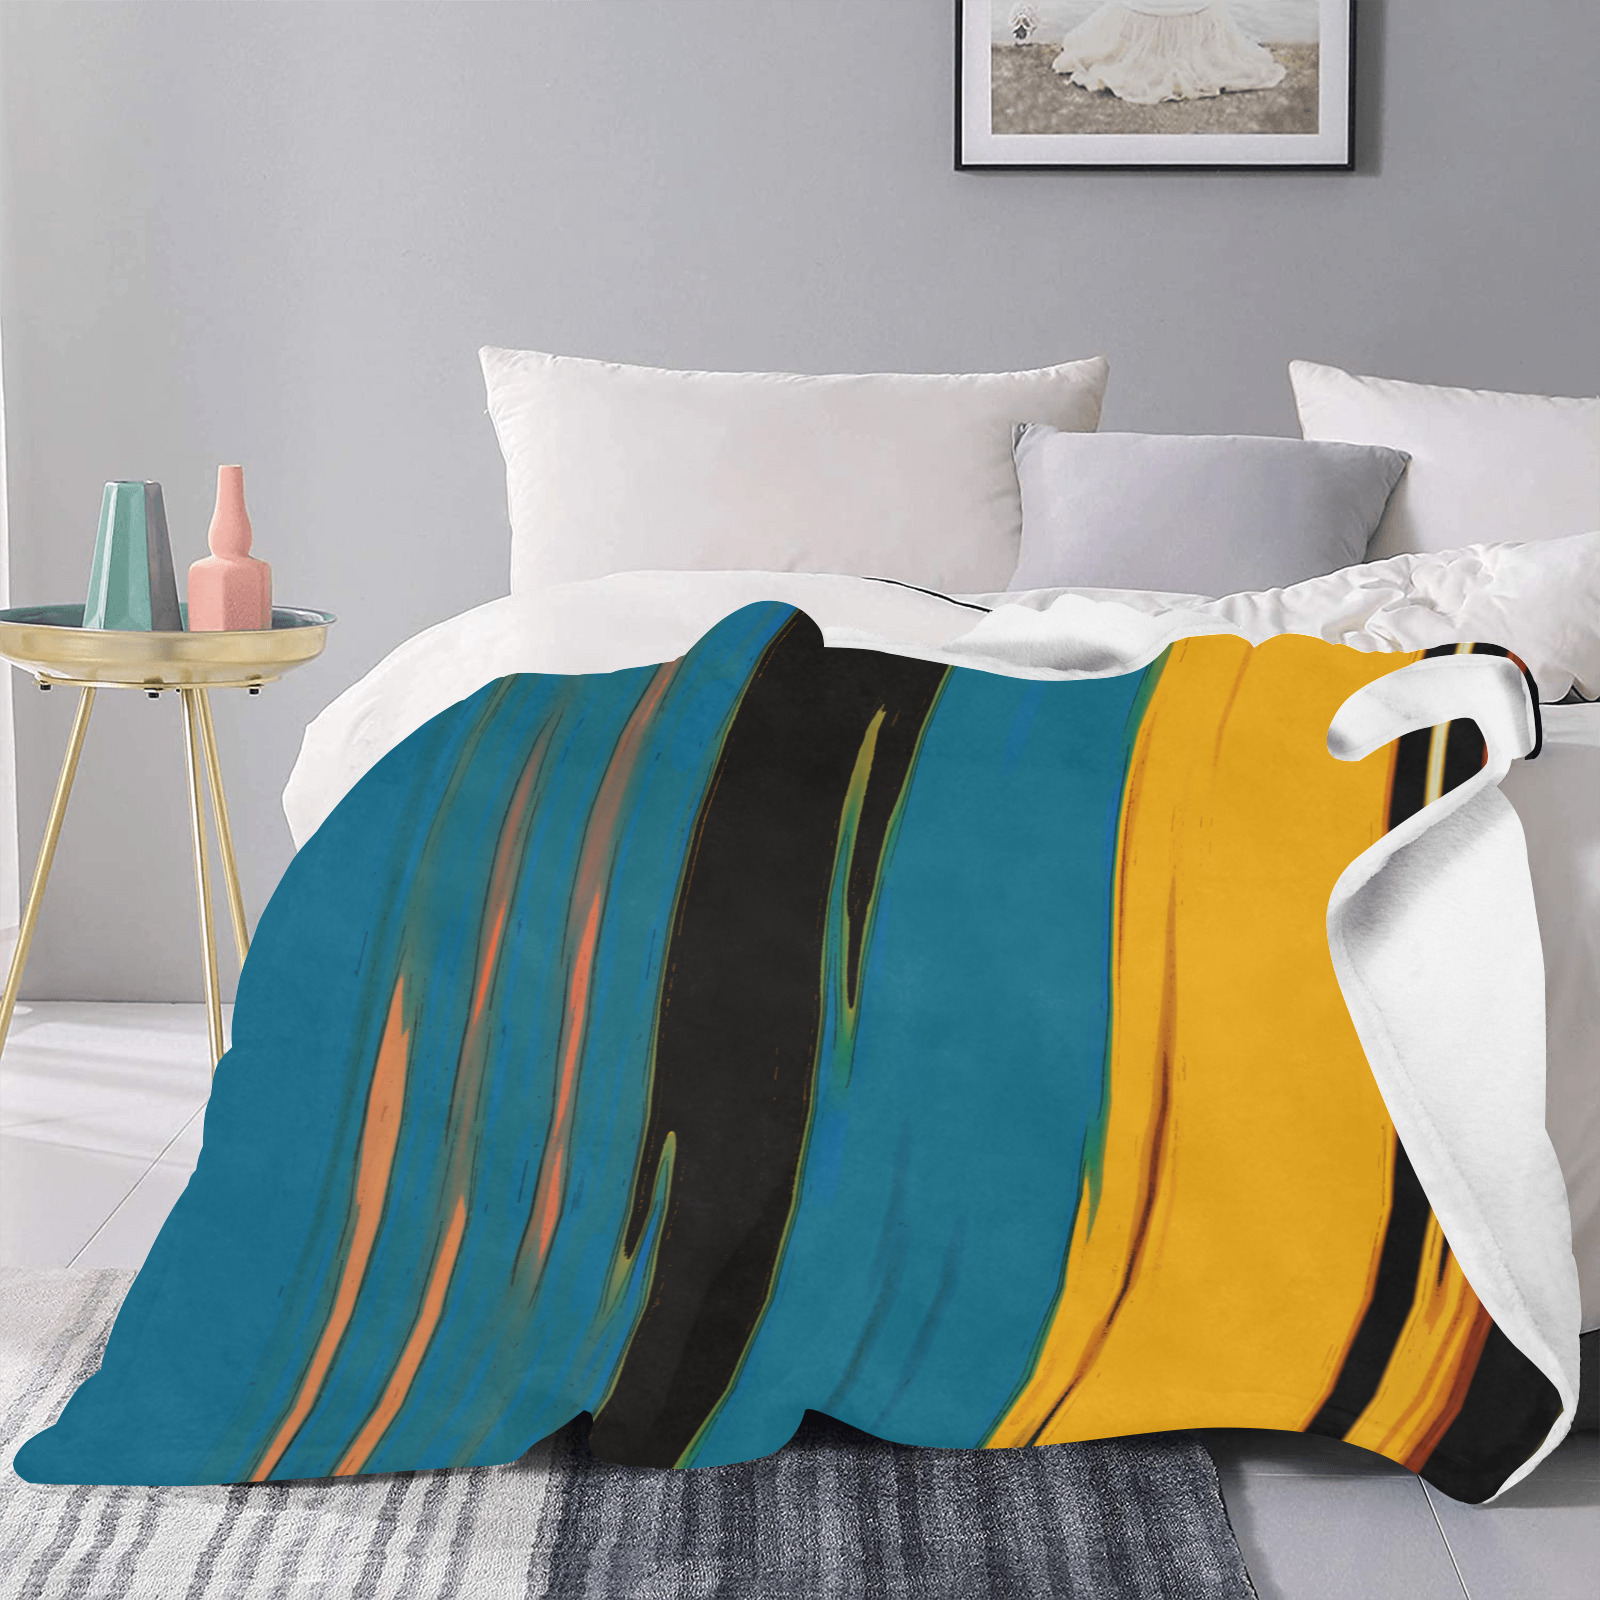 Black Turquoise And Orange Go! Abstract Art Ultra-Soft Micro Fleece Blanket 40"x50" (Thick)